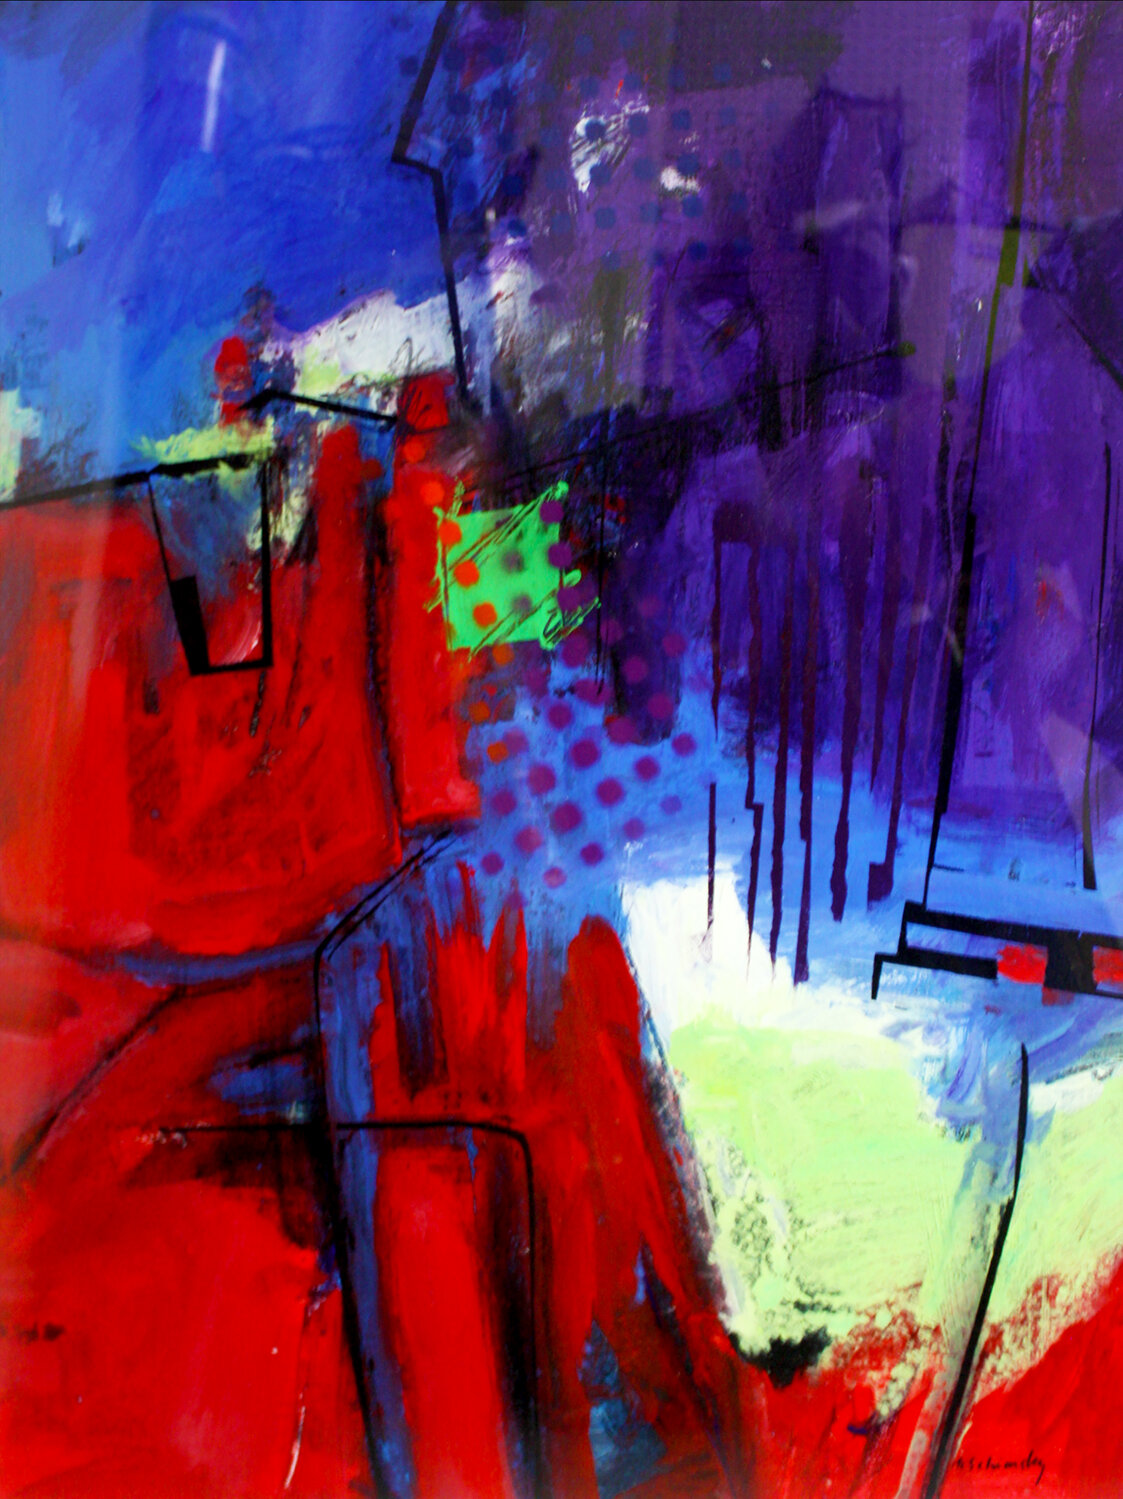 “Breaking Through,” by Marc Schimsky, is an acrylic on paper.